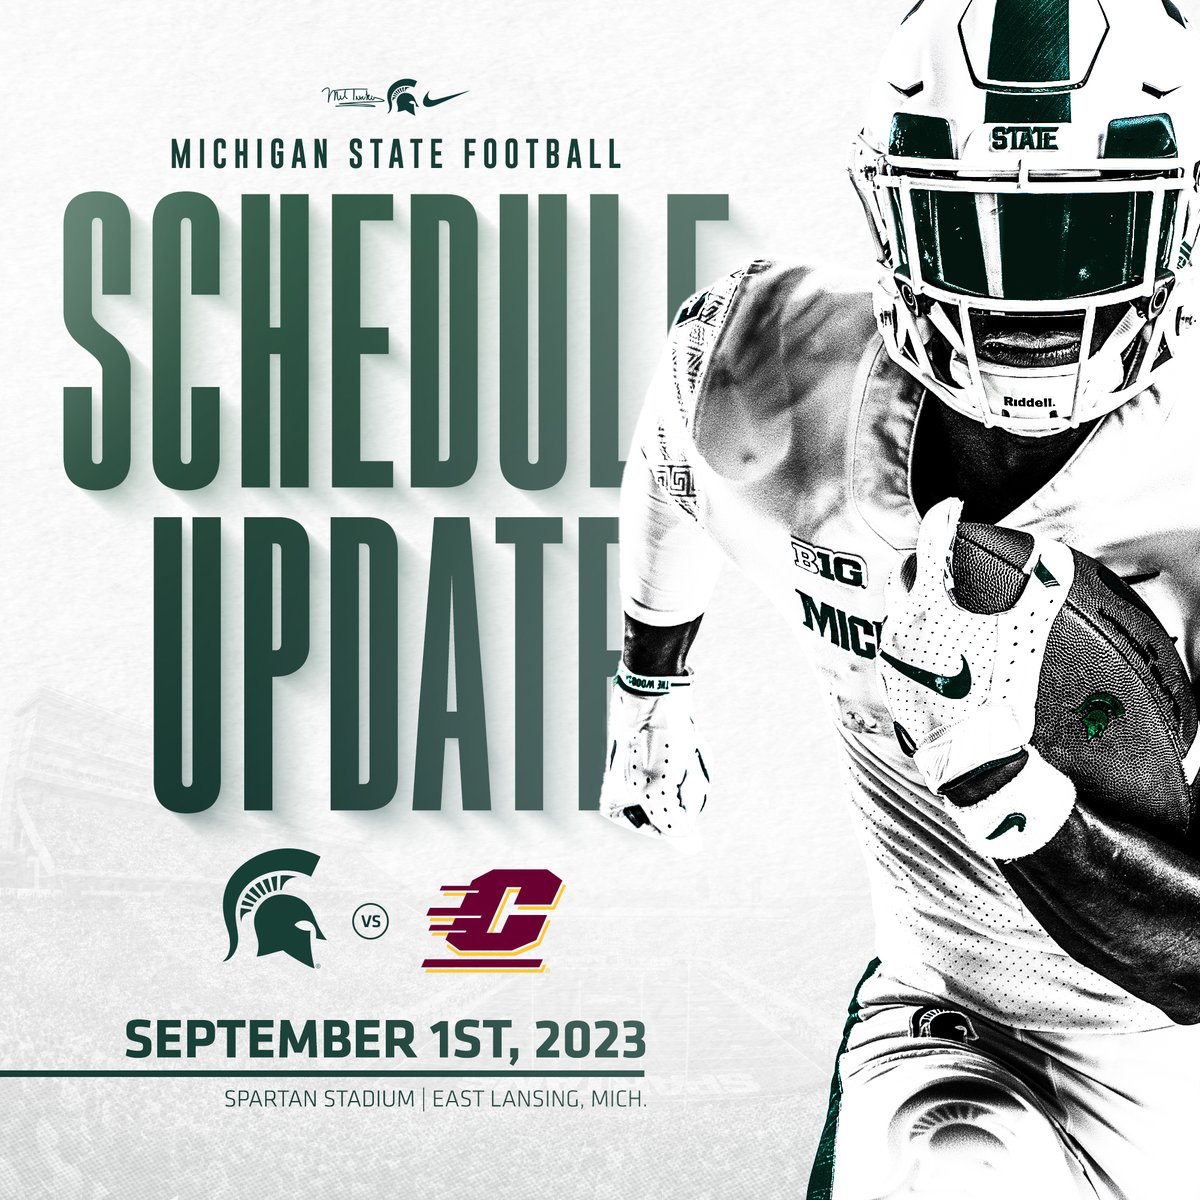 MSU Uniforms on Twitter "The week 1 schedule change a tradition